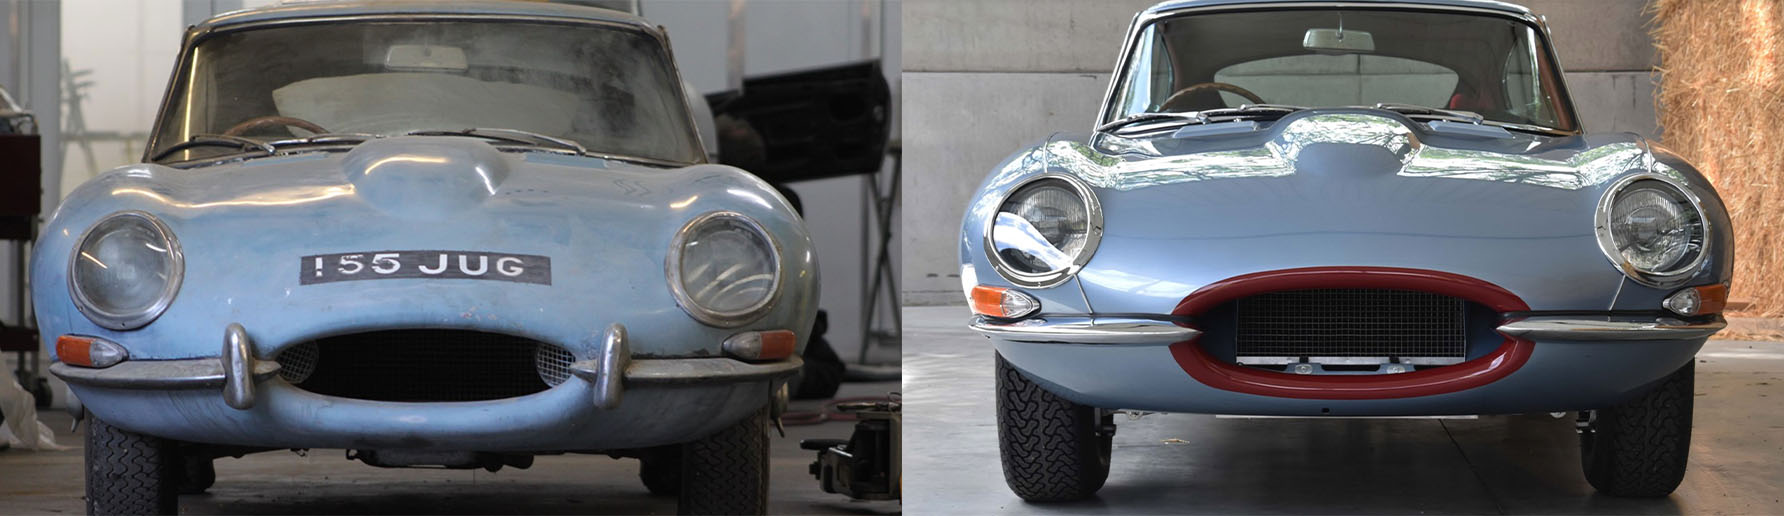 Series 1 Jaguar E-Type restored after being abandoned for 41 years